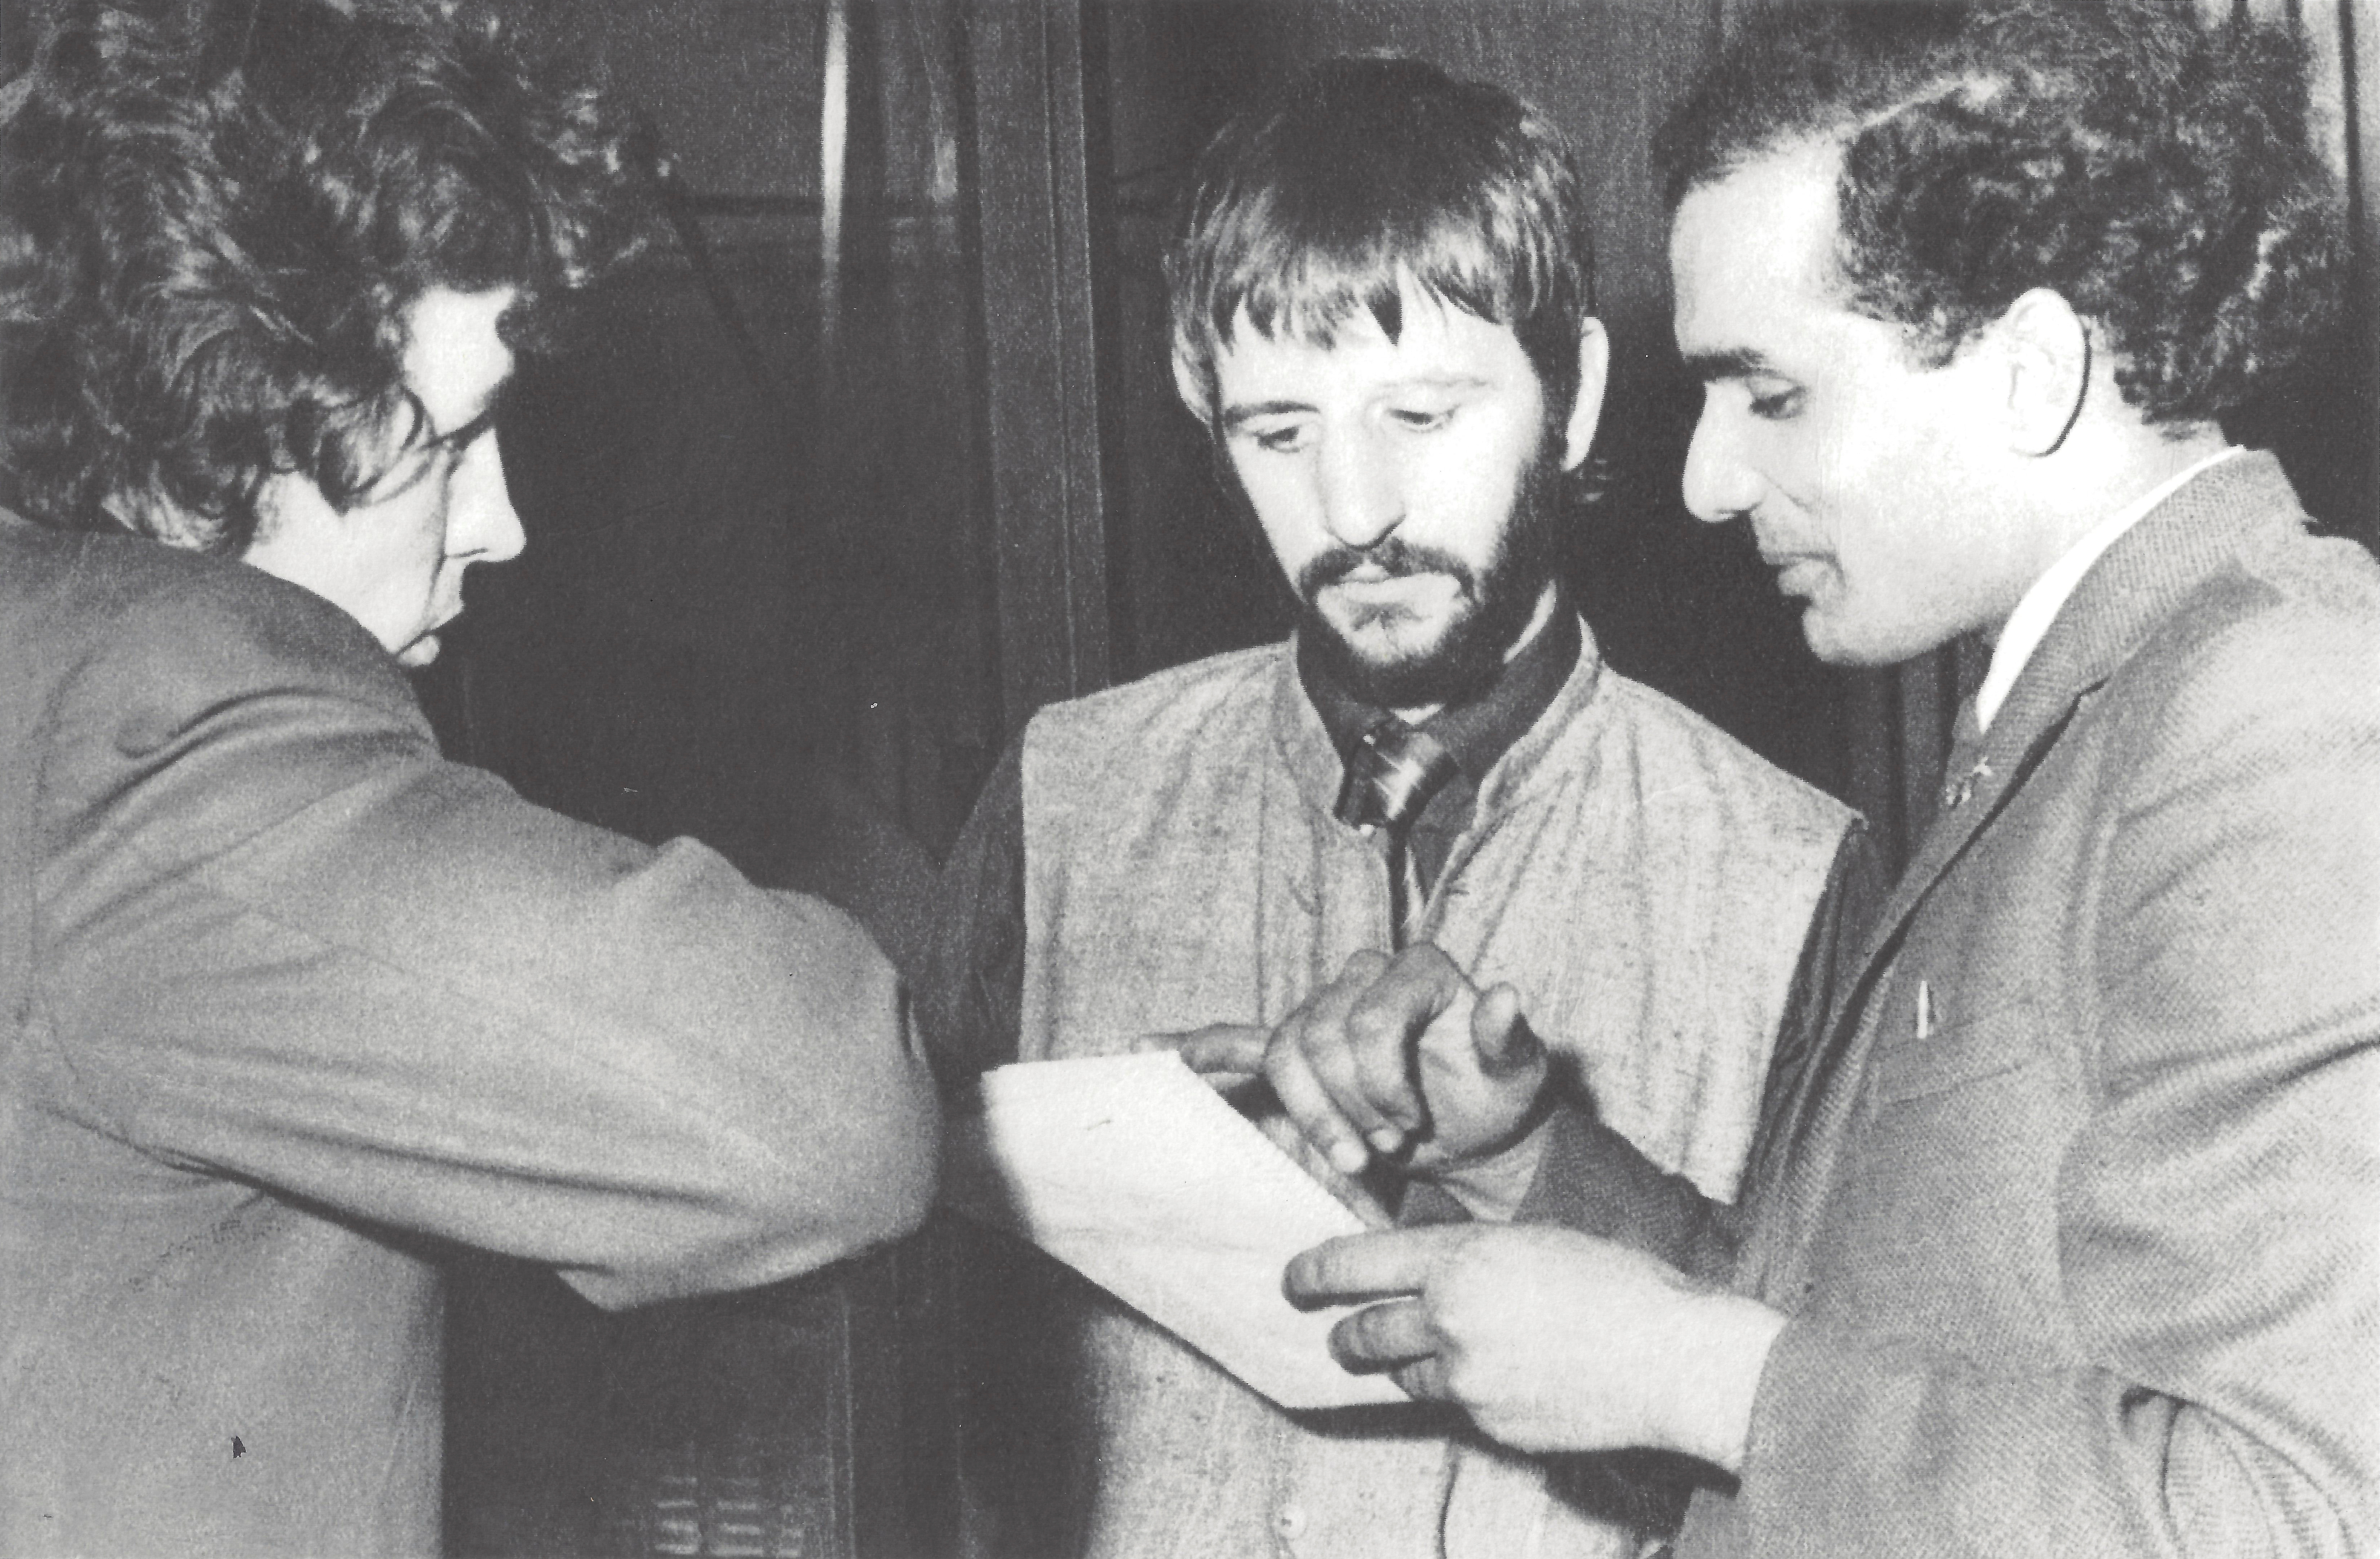 Suresh Joshi meets with engineer John Brahn and Ringo Starr in 1968 in Liverpool